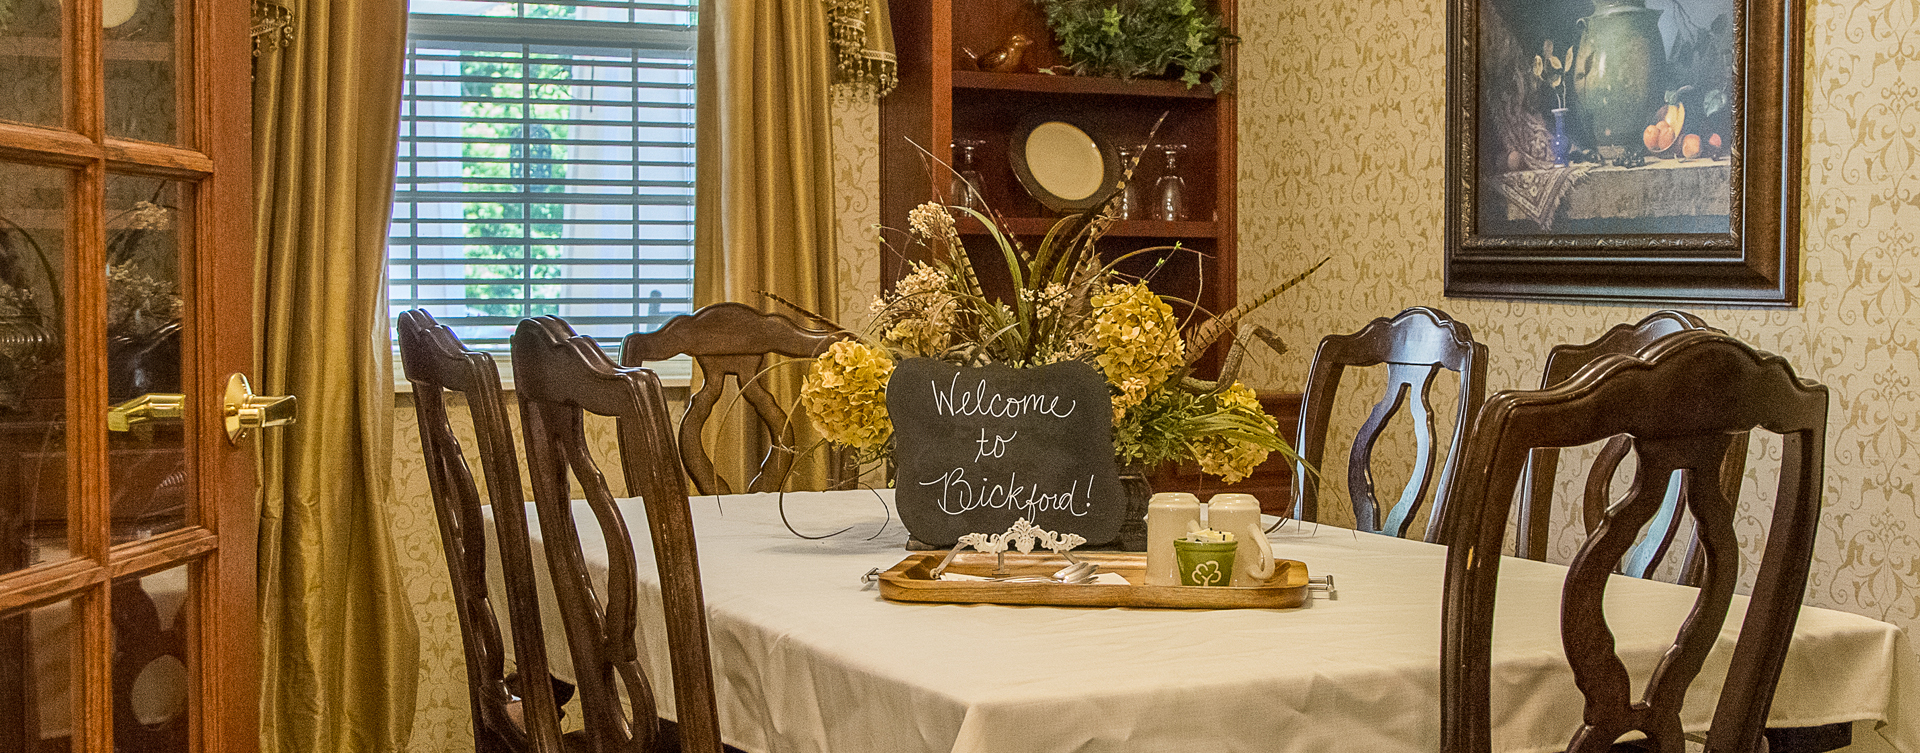 Food is best when shared with family and friends in the private dining room at Bickford of Moline